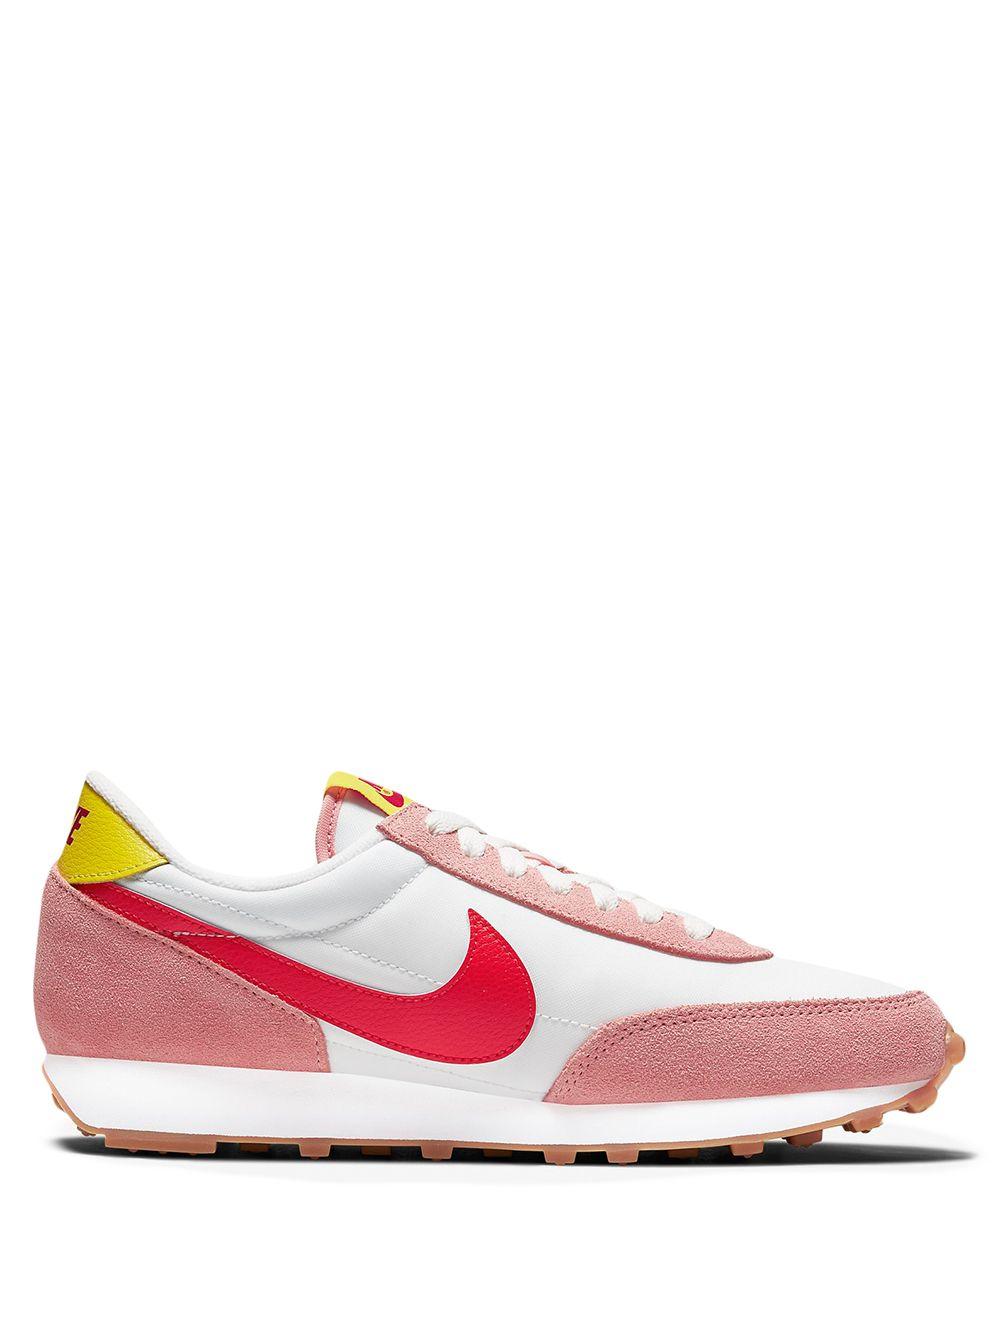 nike daybreak trainers in white and pink